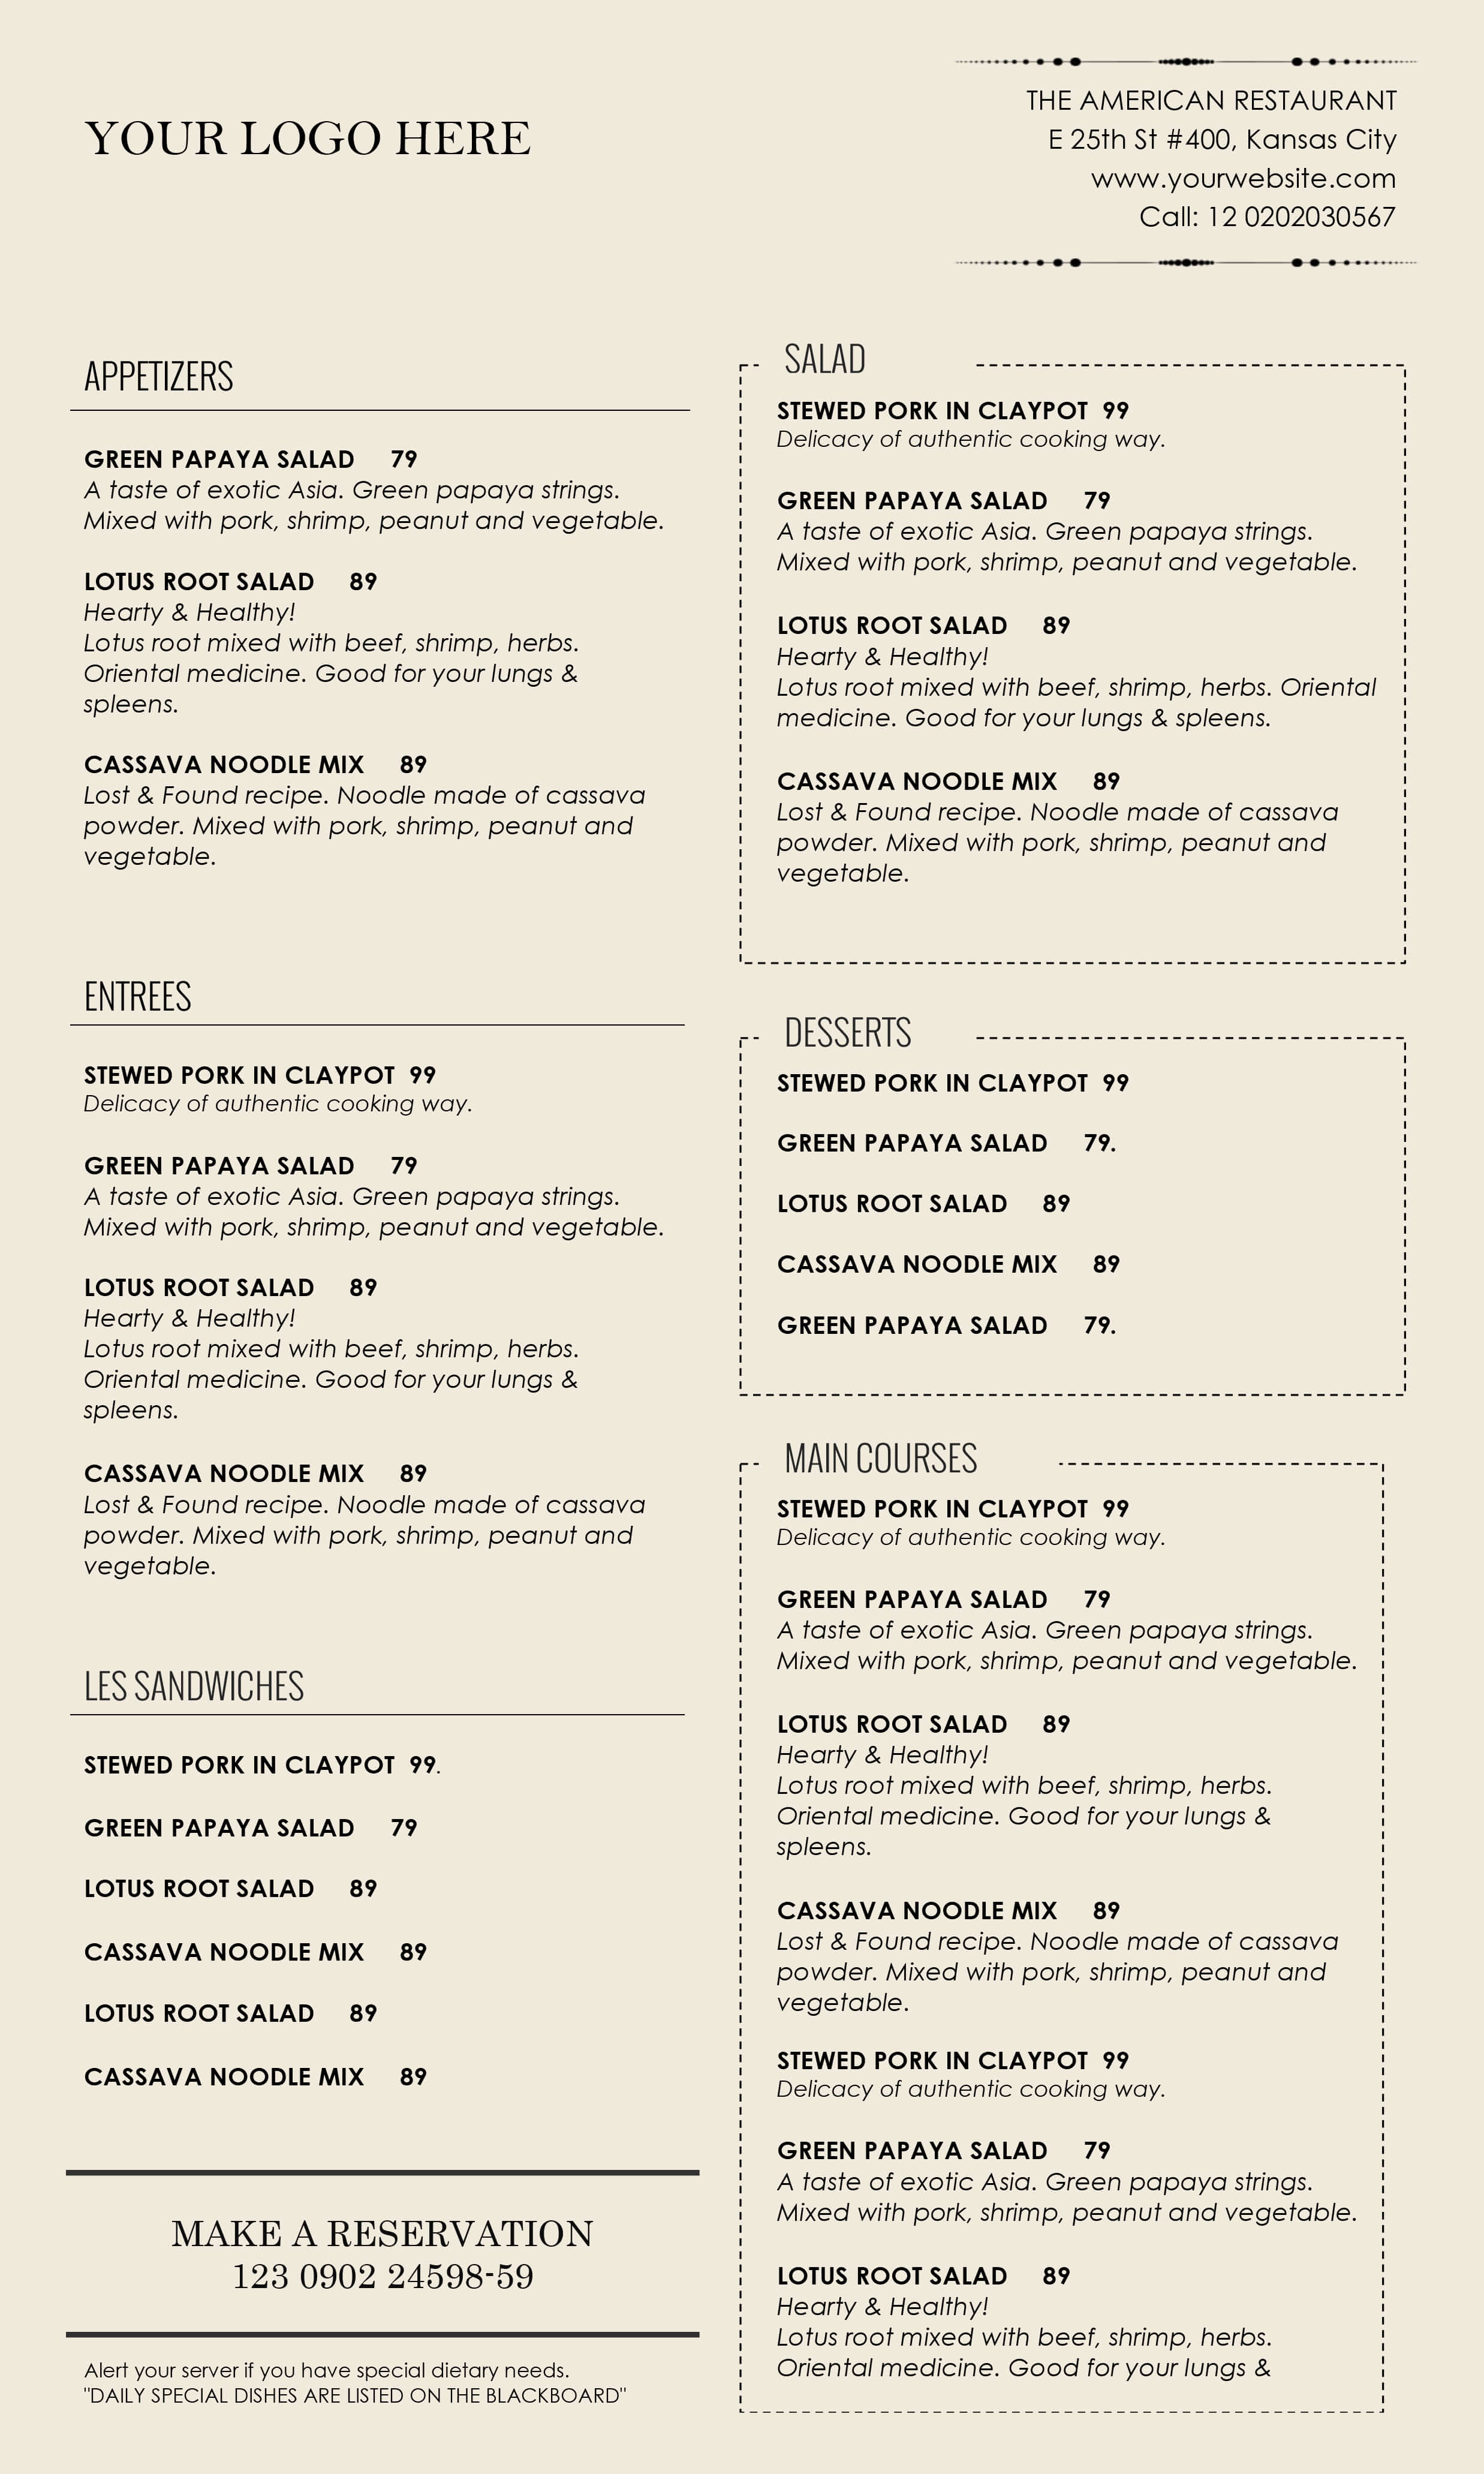 Free Cafe Menu Templates For Word – Atlantaauctionco With Free Cafe Menu Templates For Word